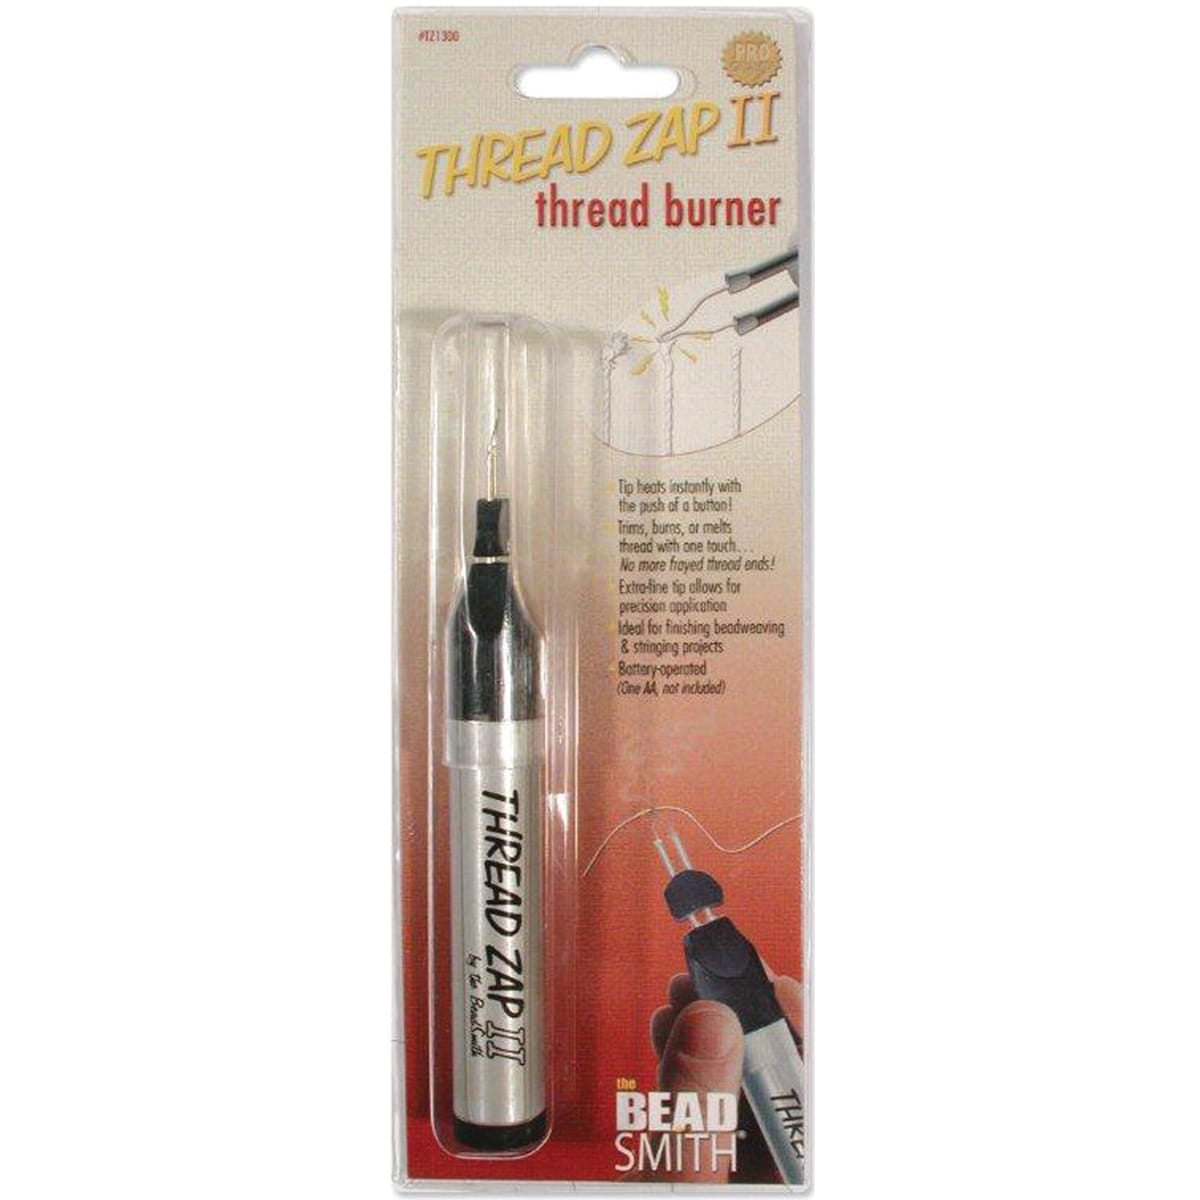 Beadsmith Ultra Thread Zap Burner Battery Operated or 2 Replacement Tips Thread  Burner TZ1400 Jewelry Making Tool 